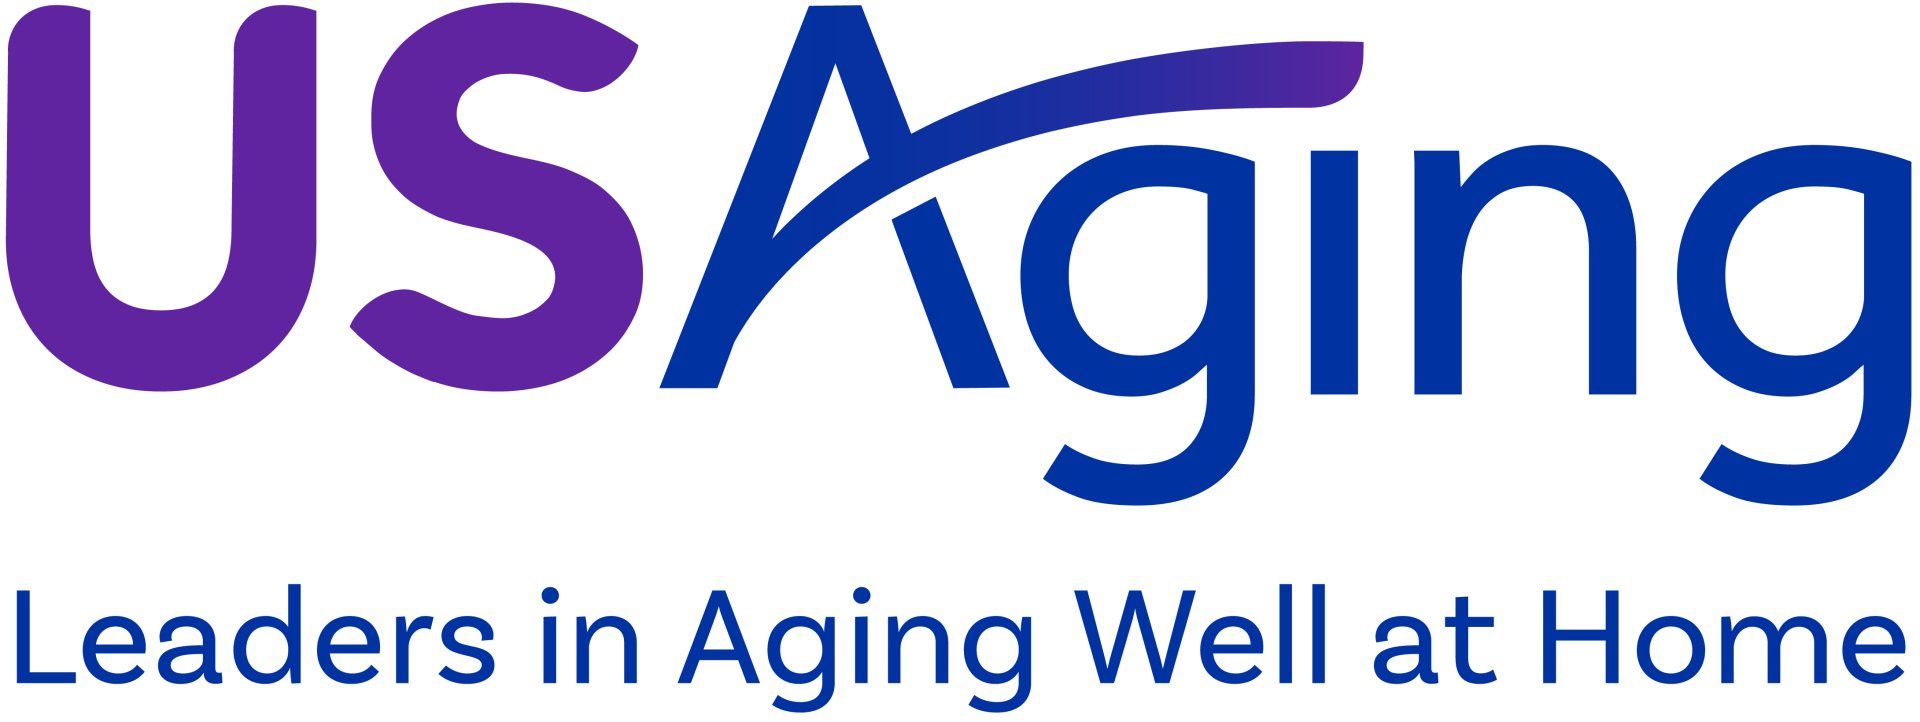 National Association of Area Agencies on Aging logo